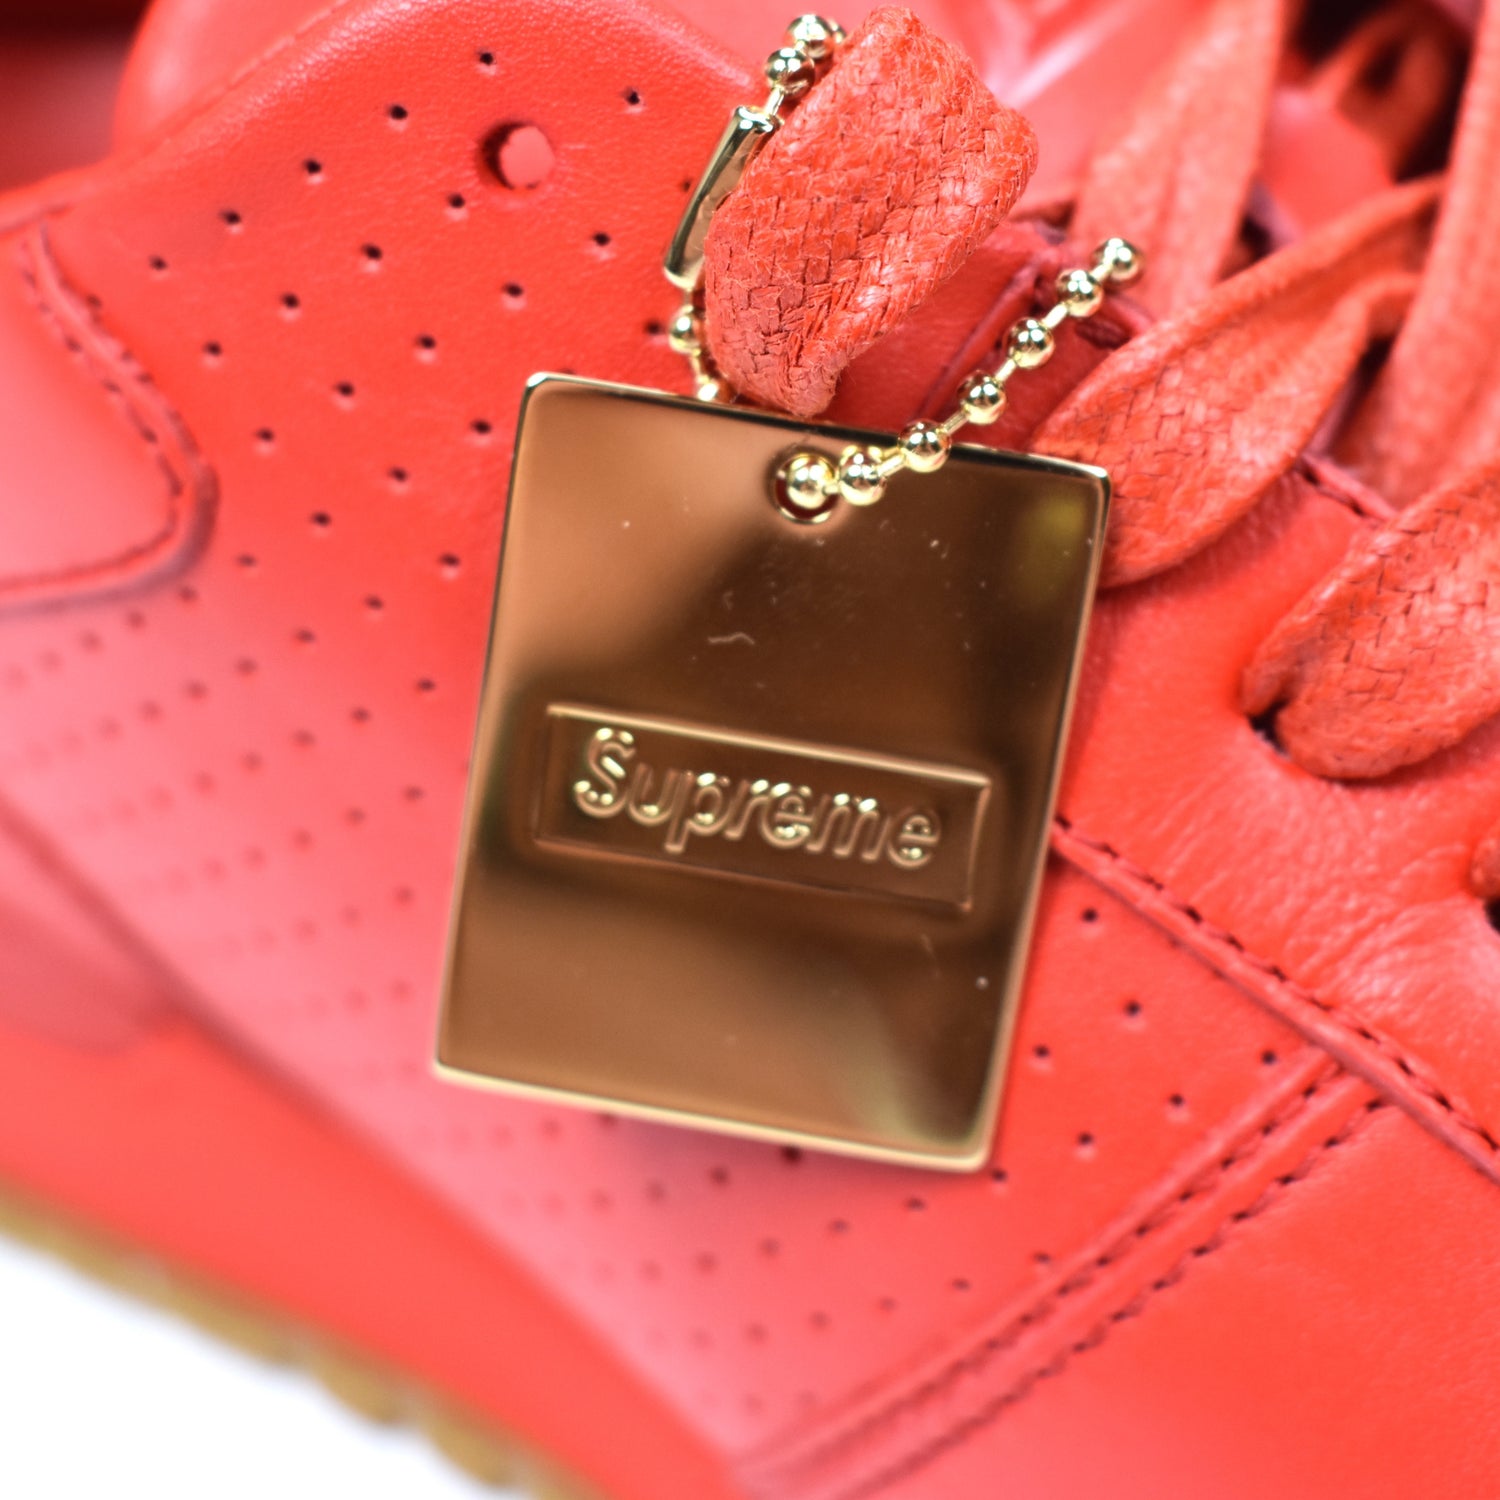 Louis Vuitton X Supreme Run Away Sneaker  Size 10 Available For Immediate  Sale At Sotheby's